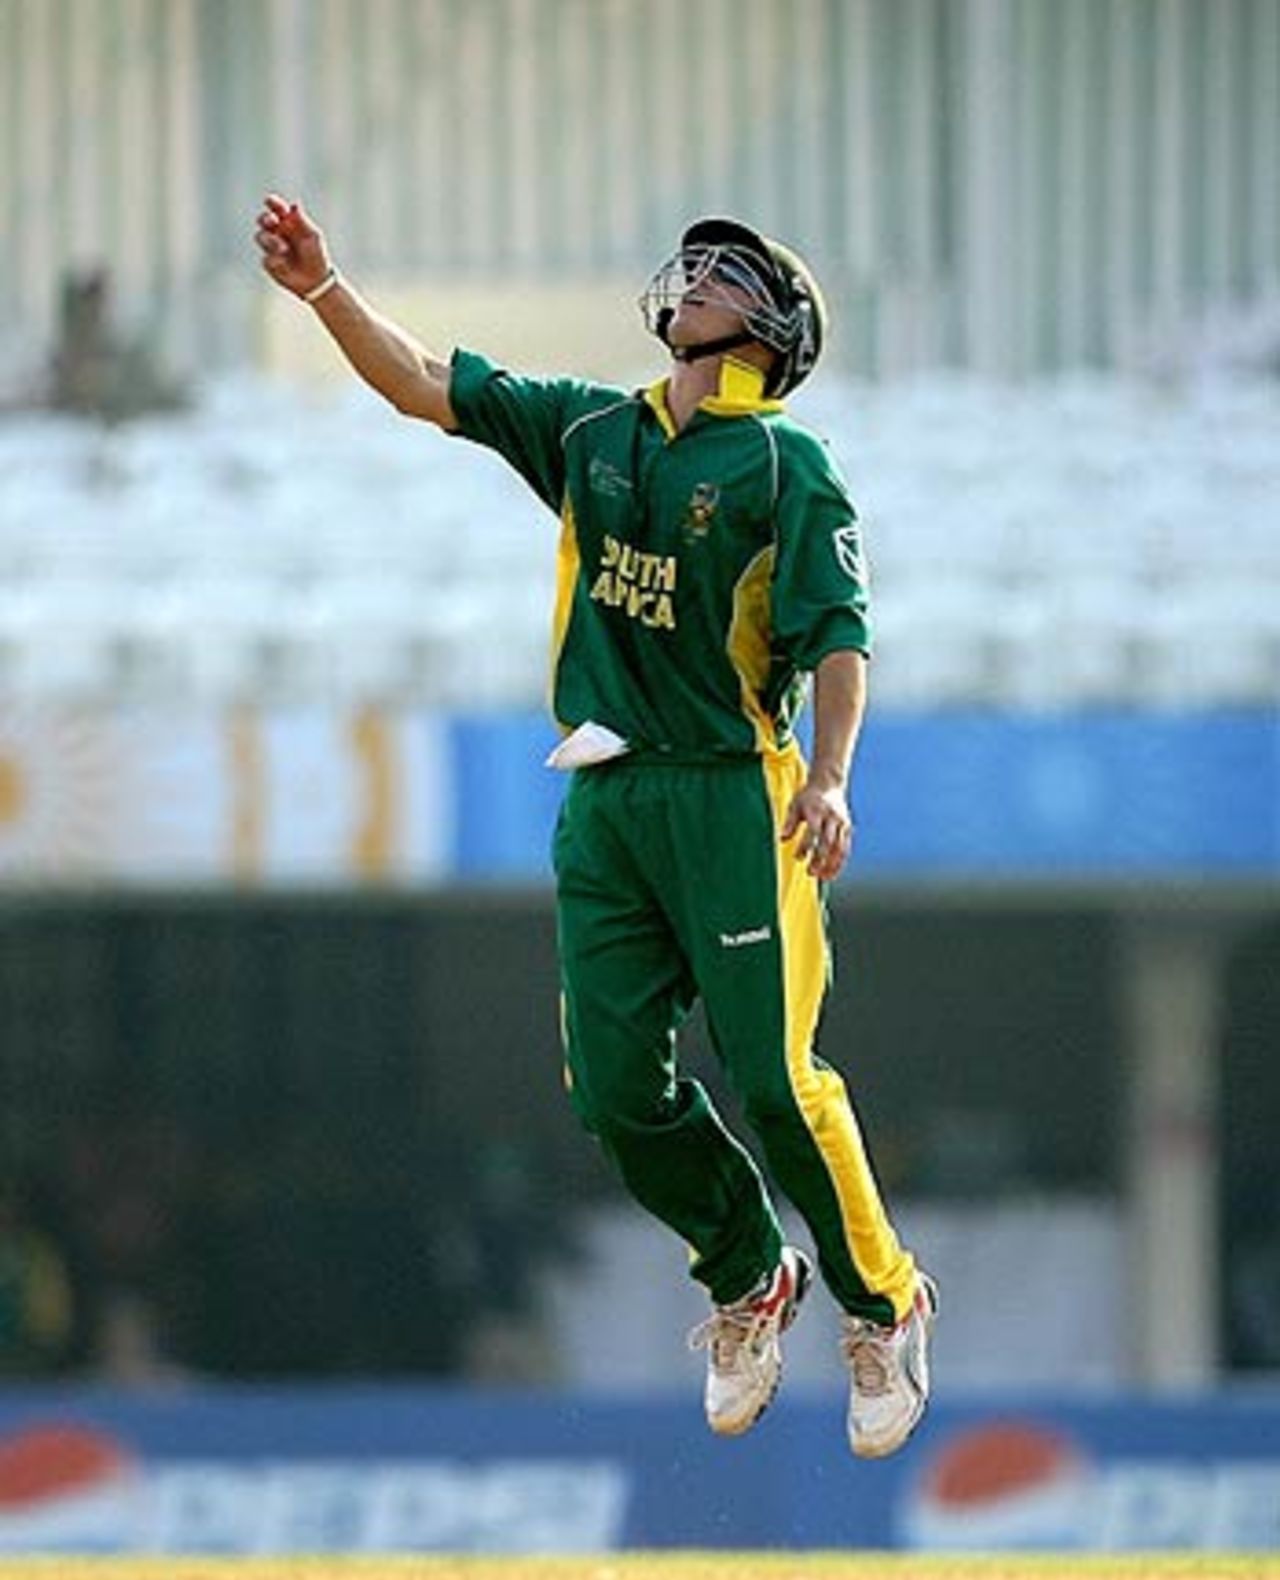 Boeta Dippenaar jumps after taking the catch to dismiss Jacob Oram, New Zealand v South Africa, 2nd Match, Champions Trophy, Mumbai, October 16, 2006